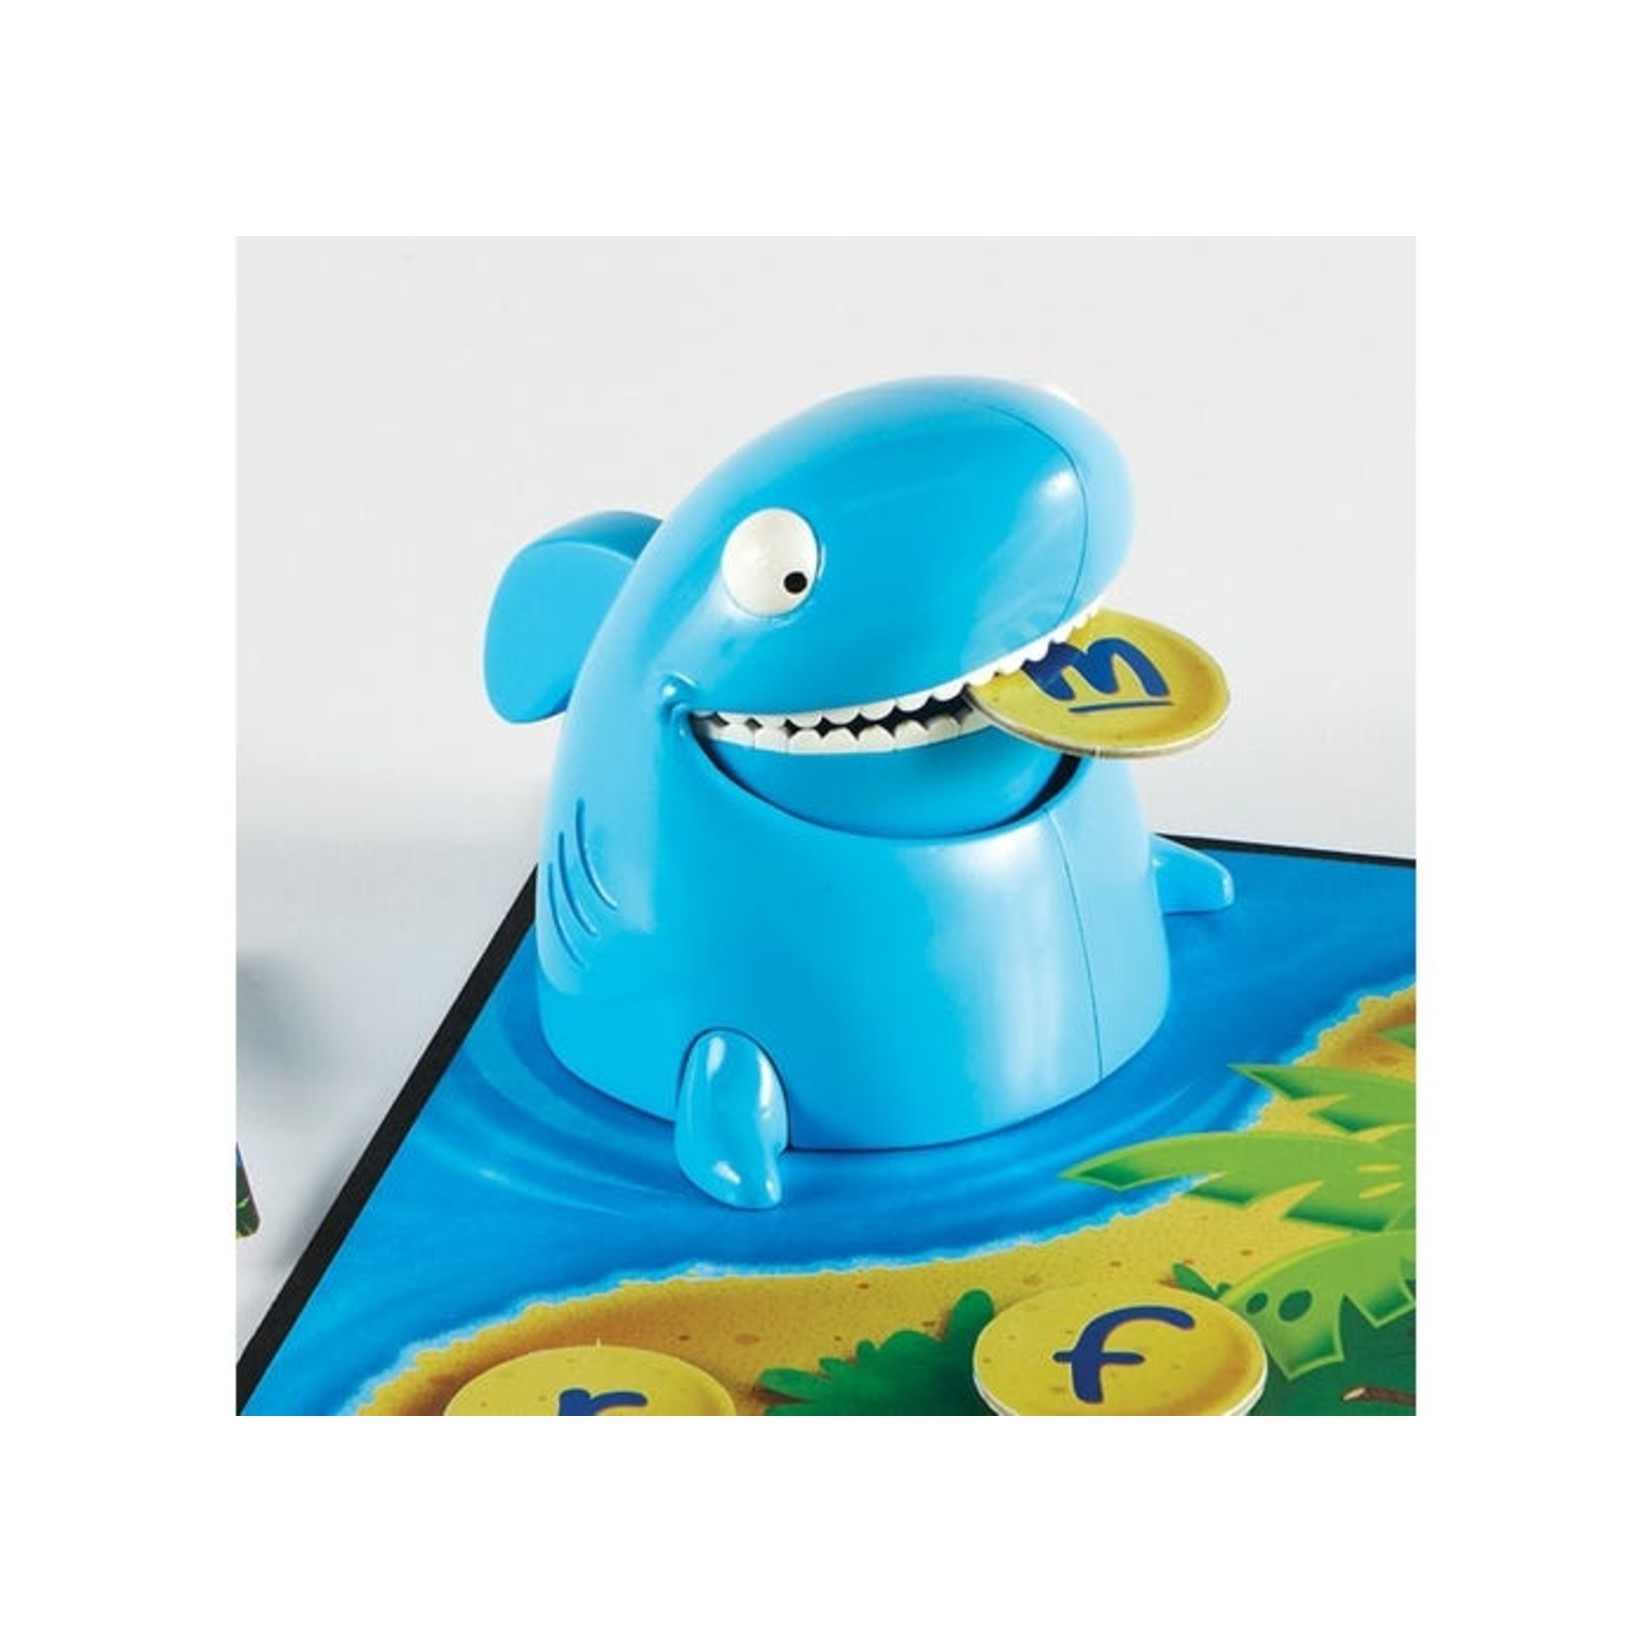 LEARNING RESOURCES INC Alphabet Island™ A Letters & Sounds Game